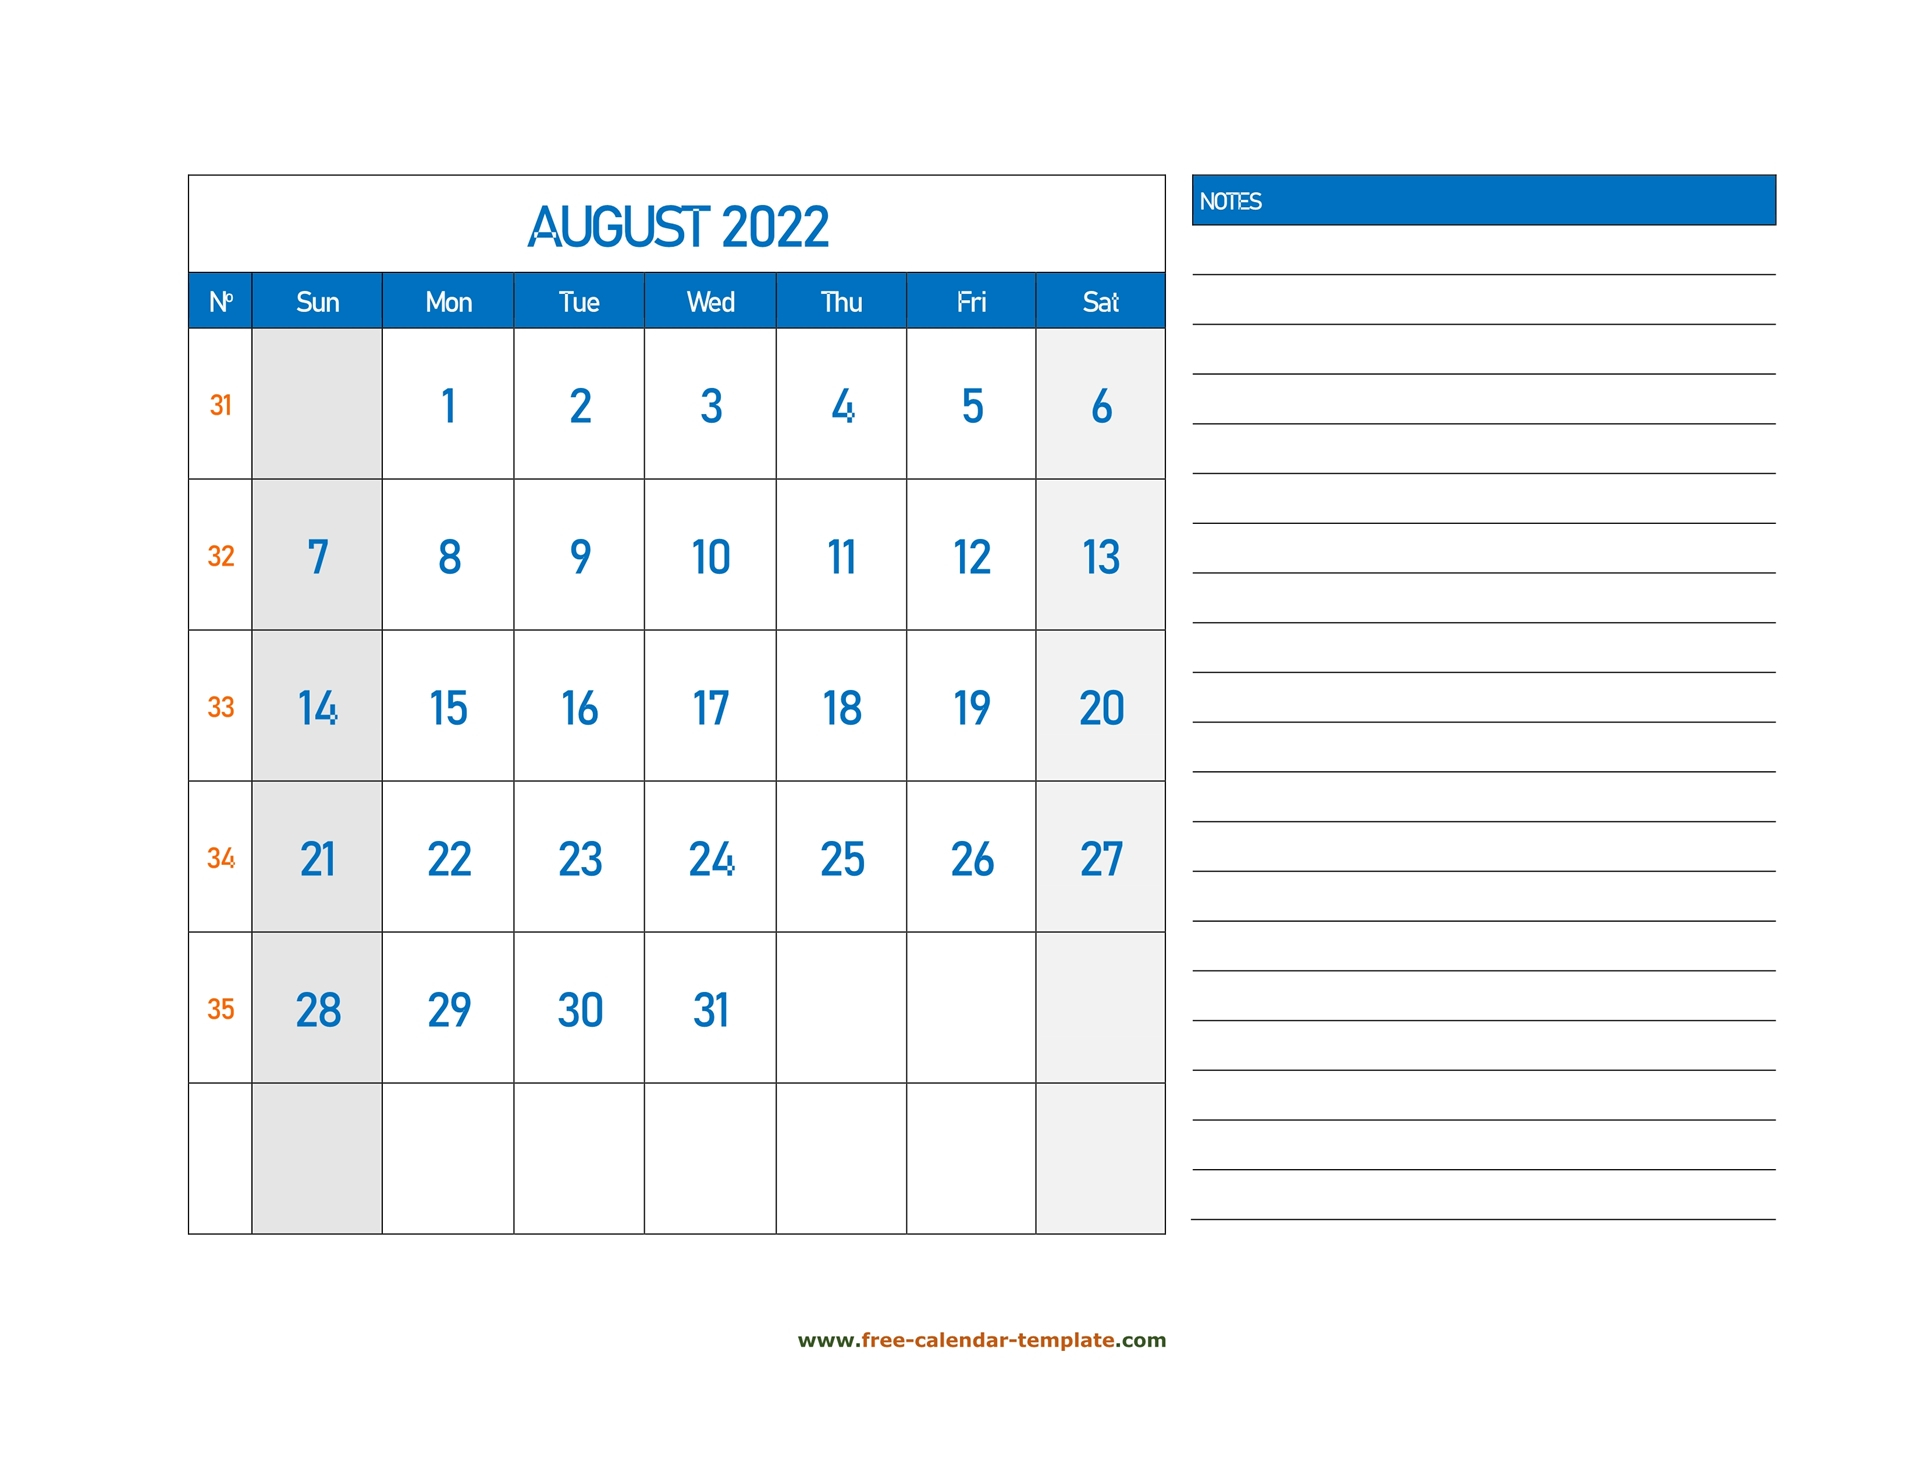 August Calendar 2022 Grid Lines For Holidays And Notes